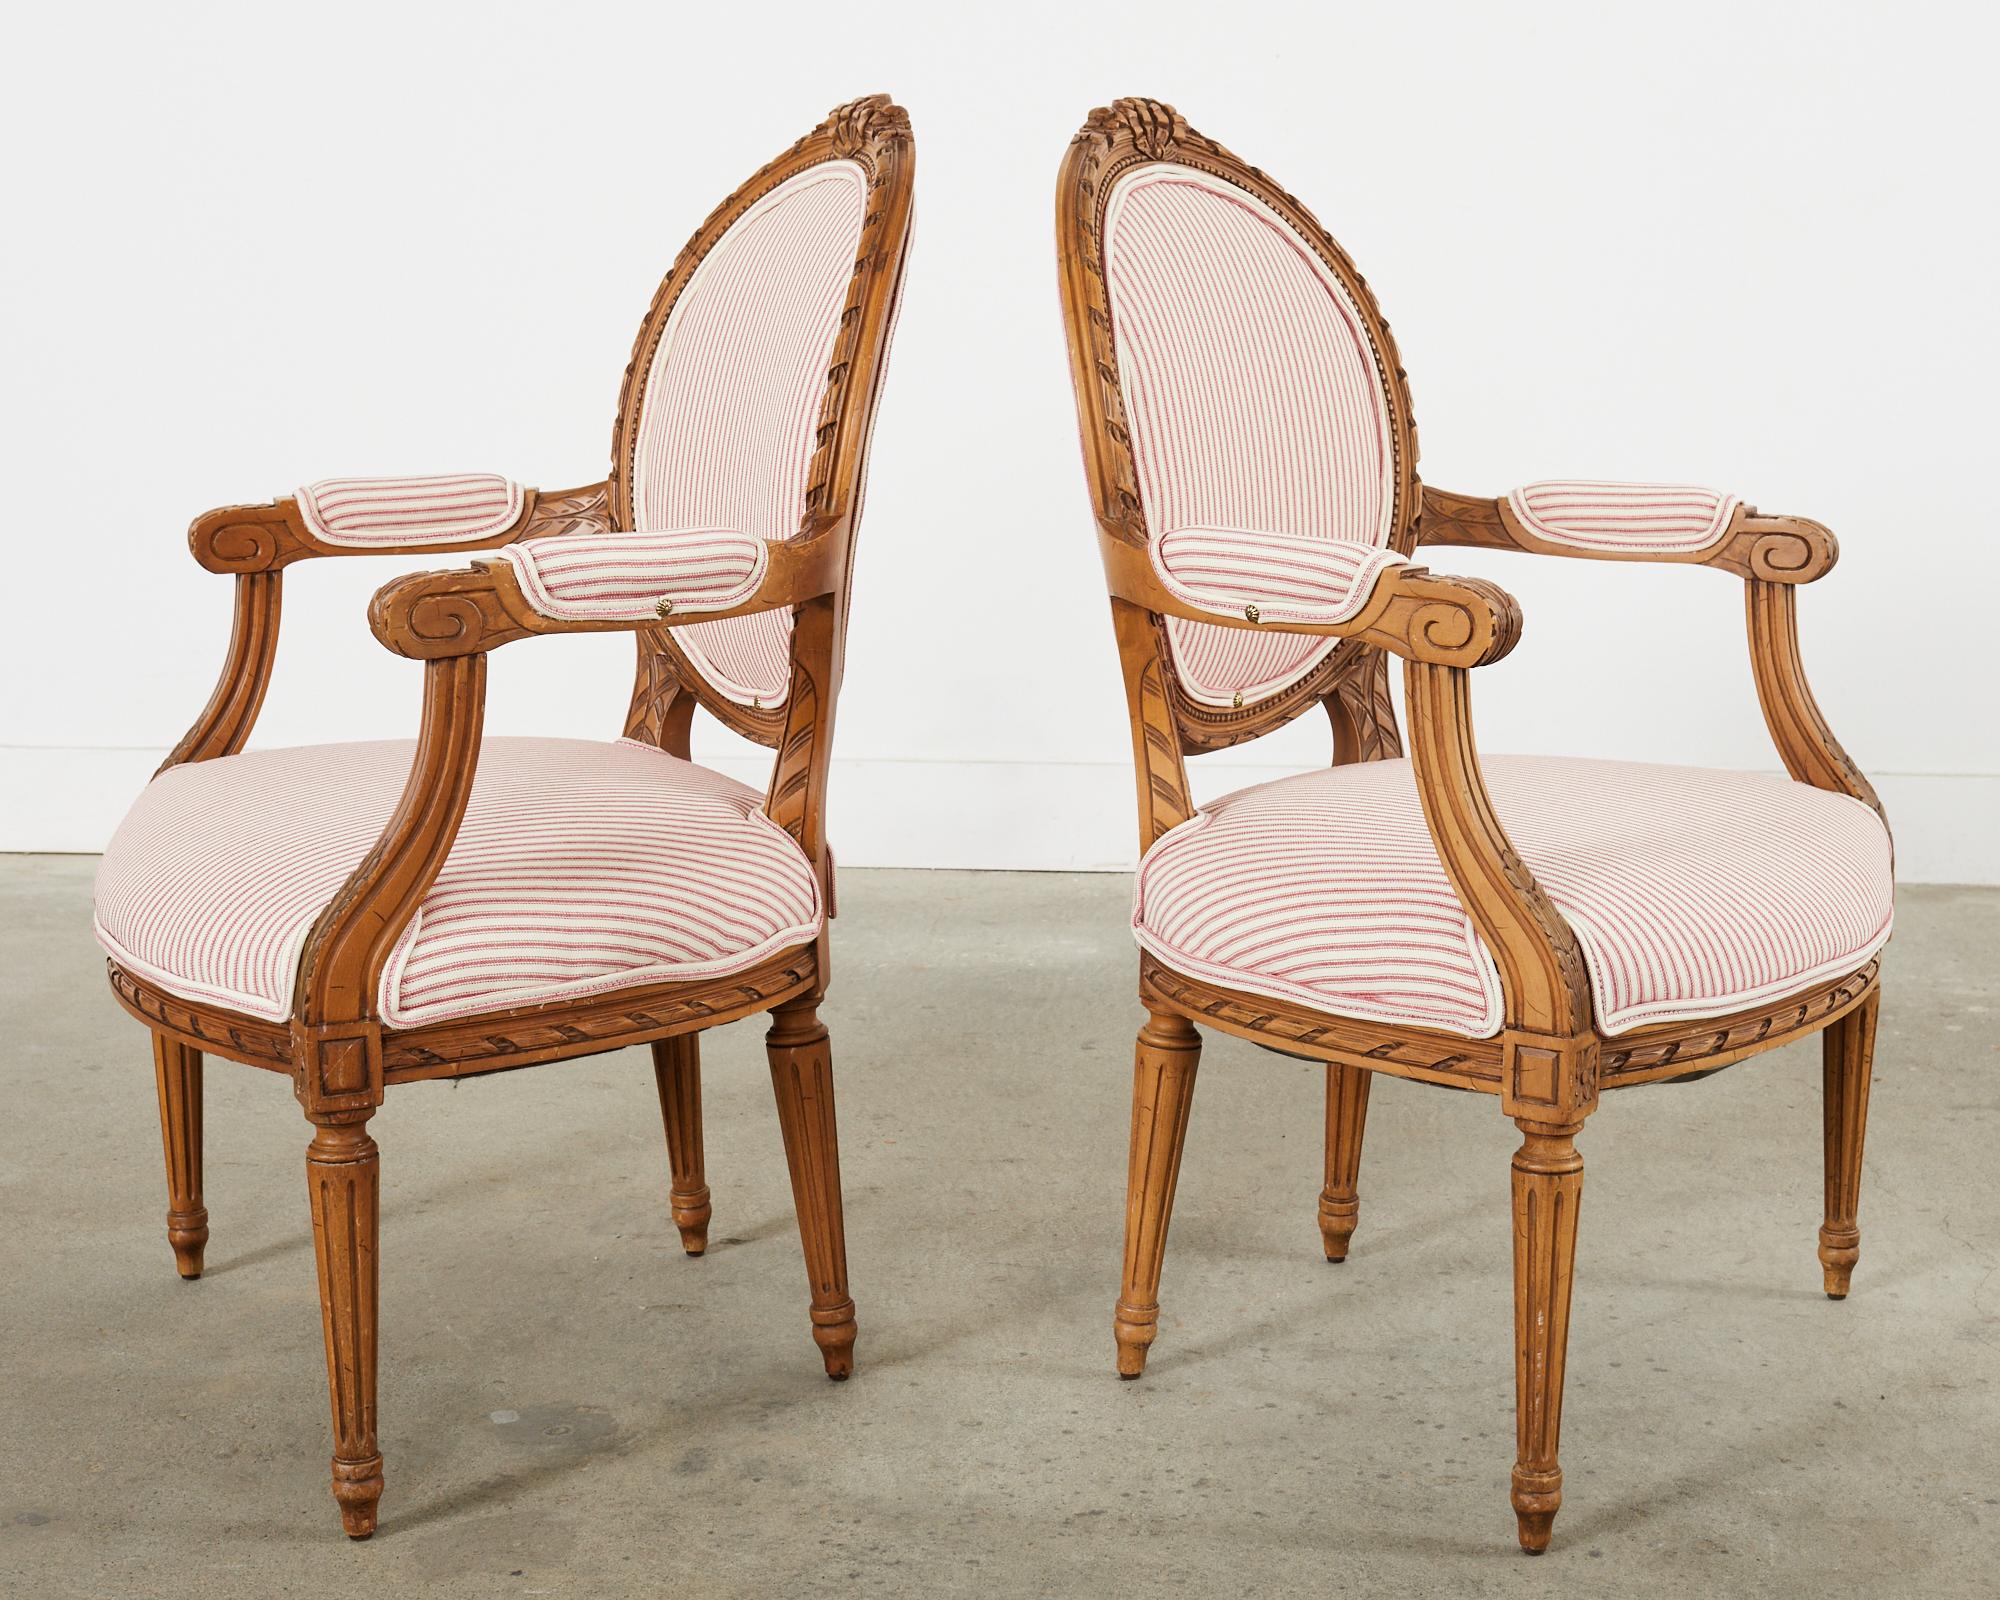 20th Century Pair of French Louis XVI Style Cameo Back Fauteuil Armchairs For Sale